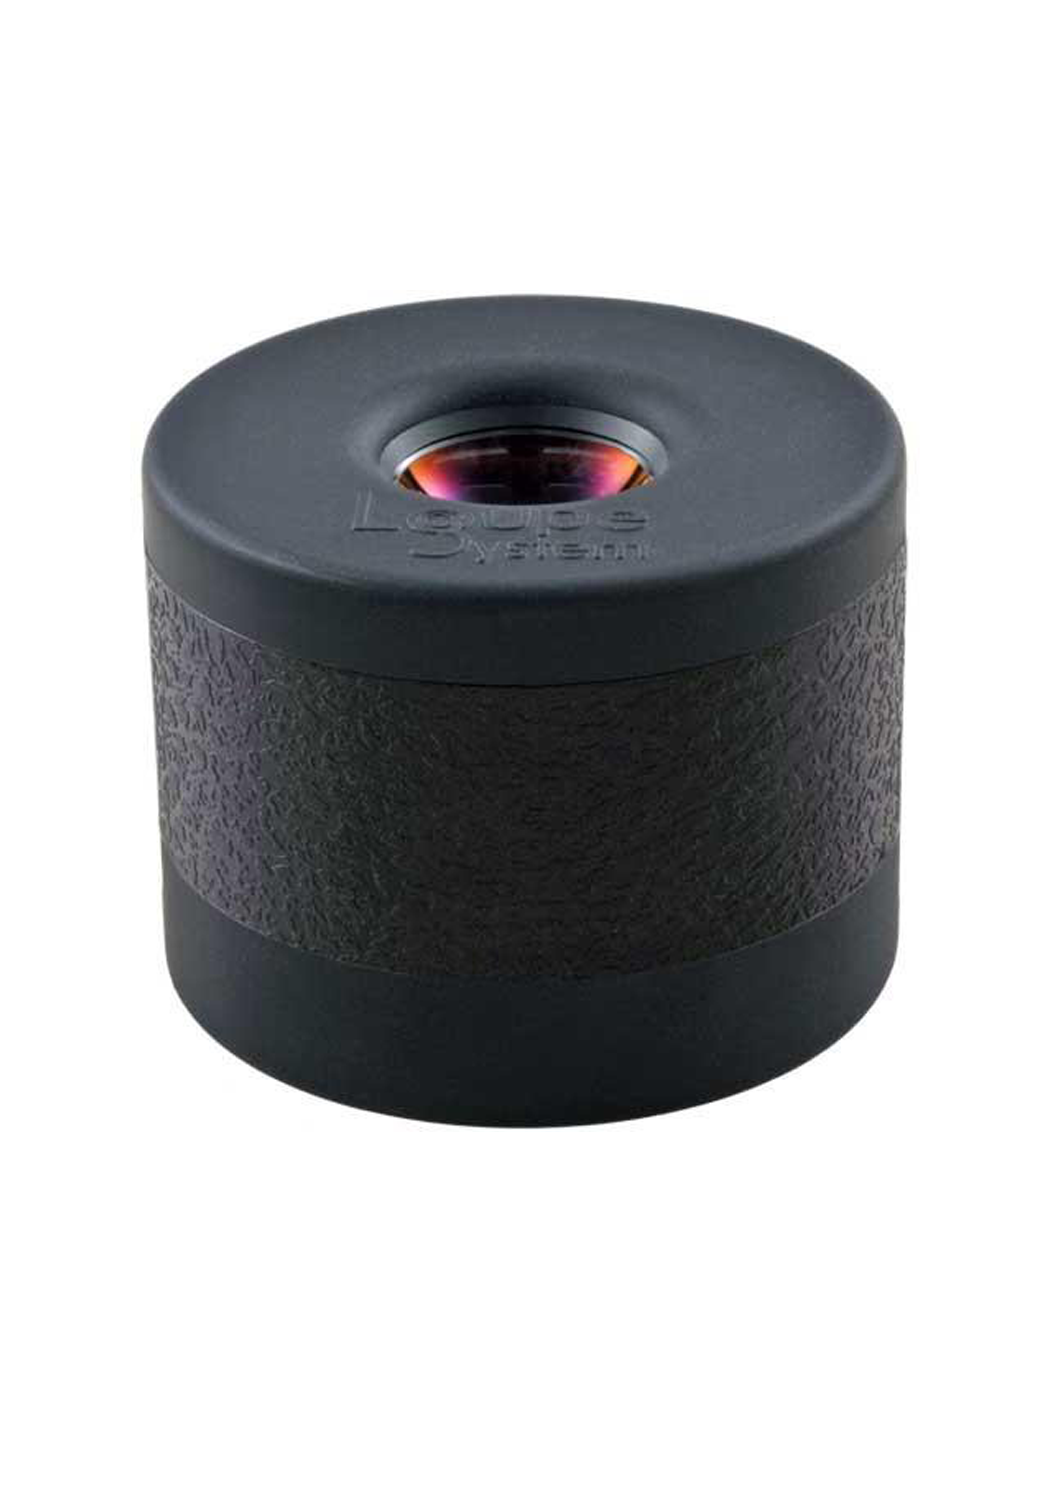 Loupe System Black Rubber Loupe | 6X Magnification | OsterJewelers.com